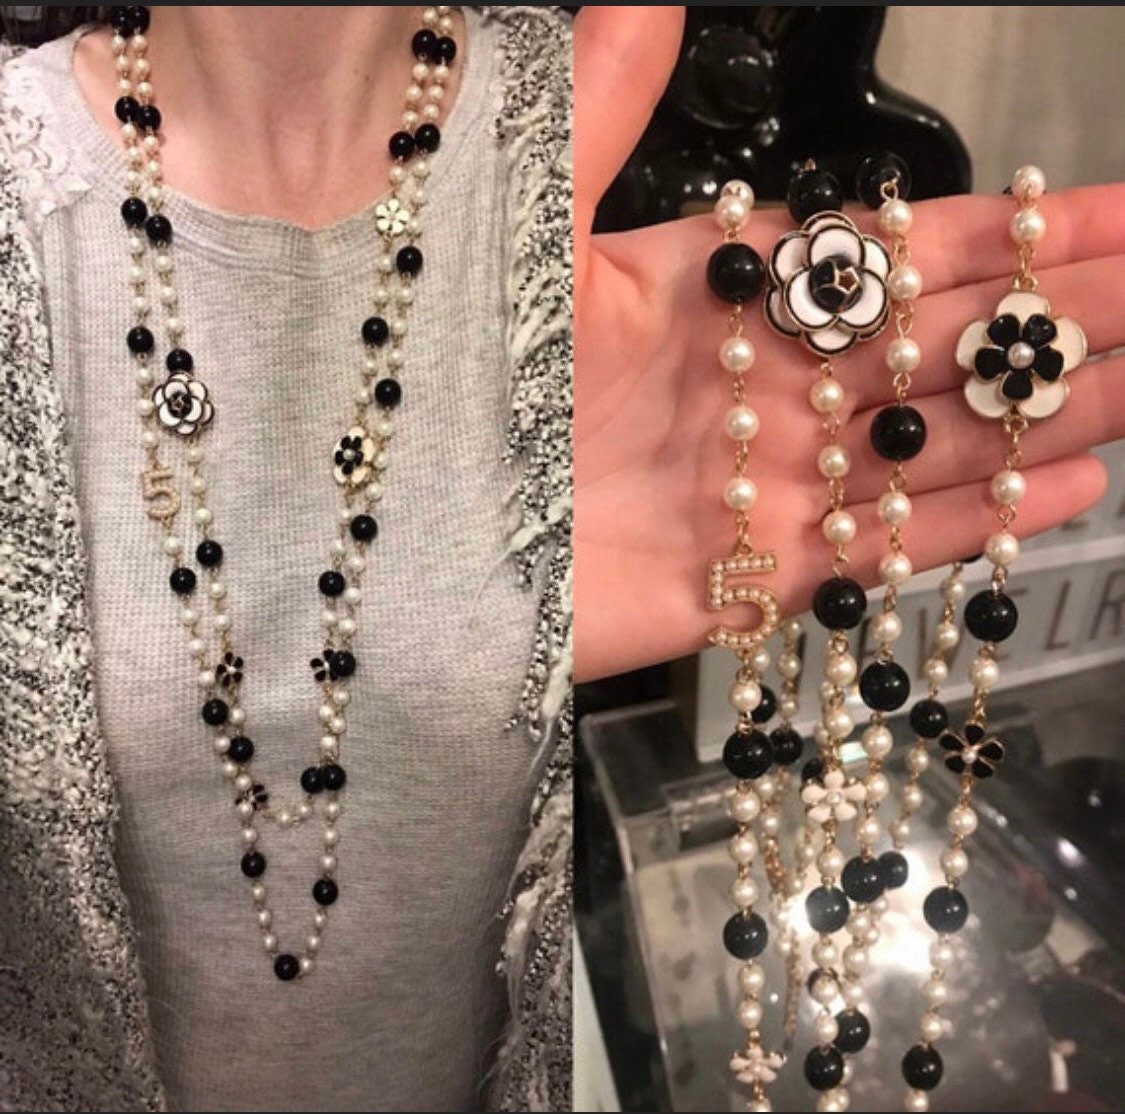 CHANEL  Jewelry  Chanel Multiple Pearl Layered Necklace  Poshmark